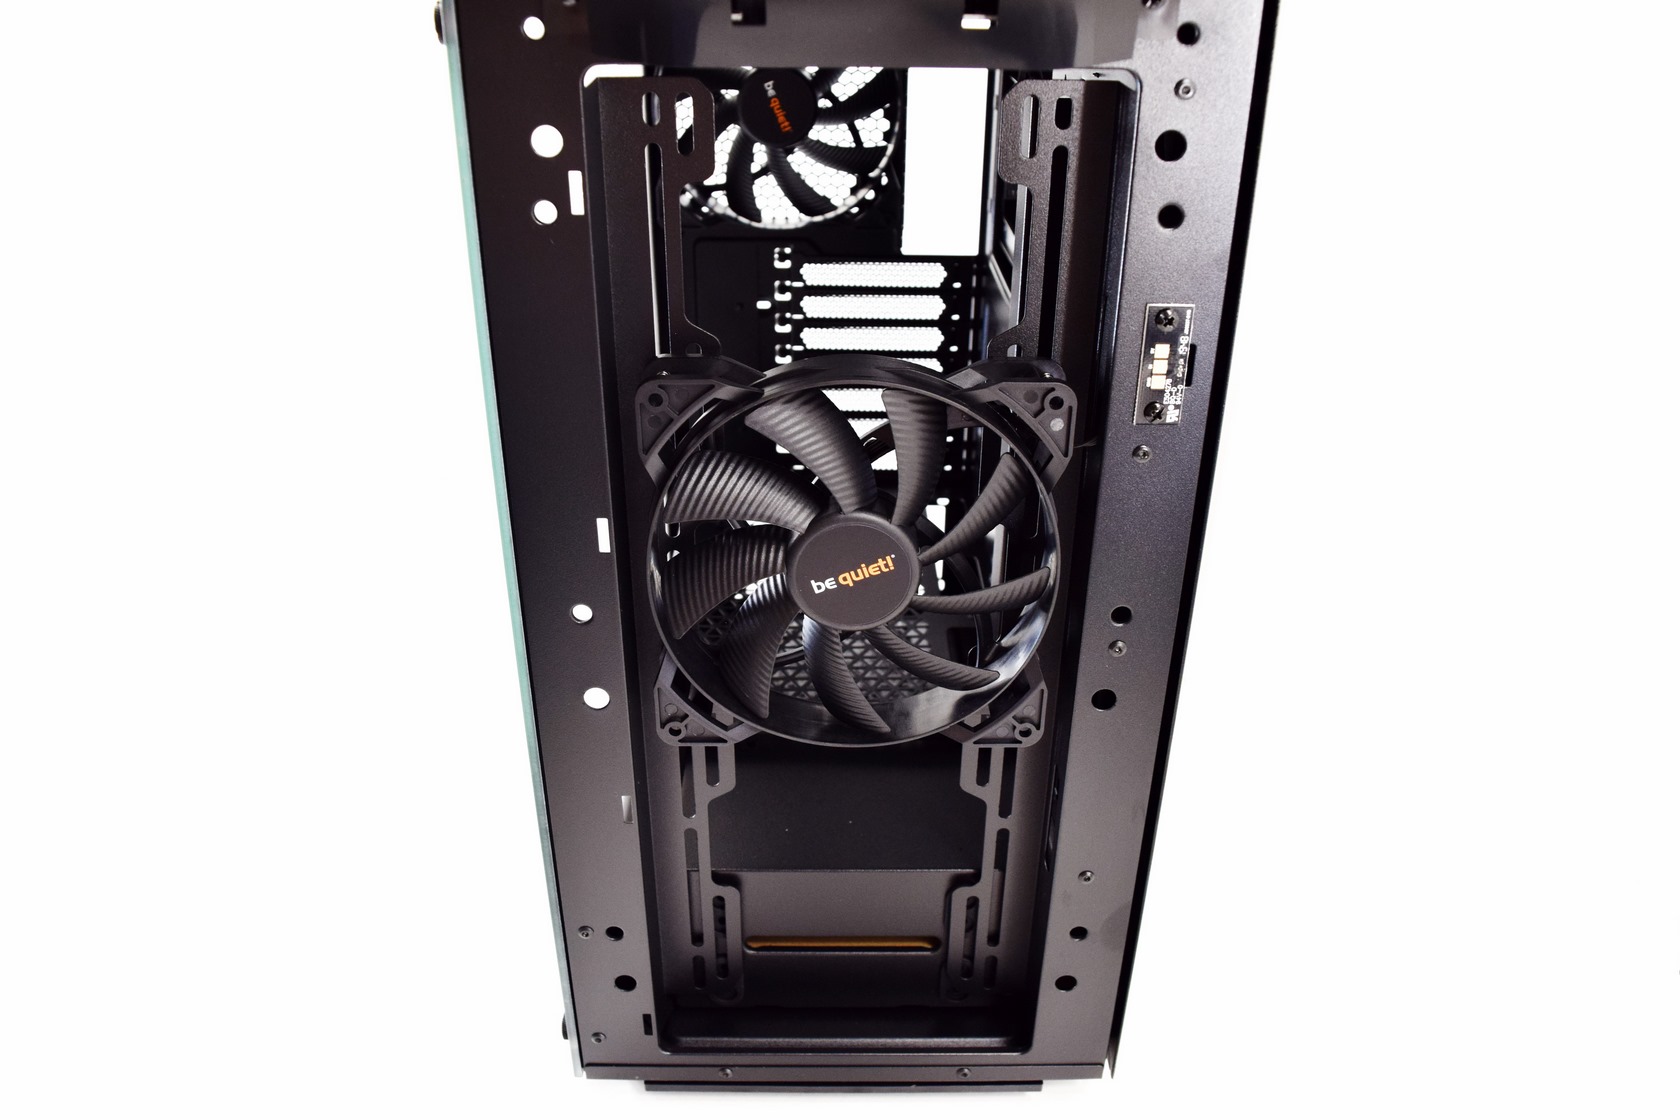 be quiet! Pure Base 500DX ATX Mid Tower PC case | ARGB | 3 Pre-Installed  Pure Wings 2 Fans | Tempered Glass Window | Black